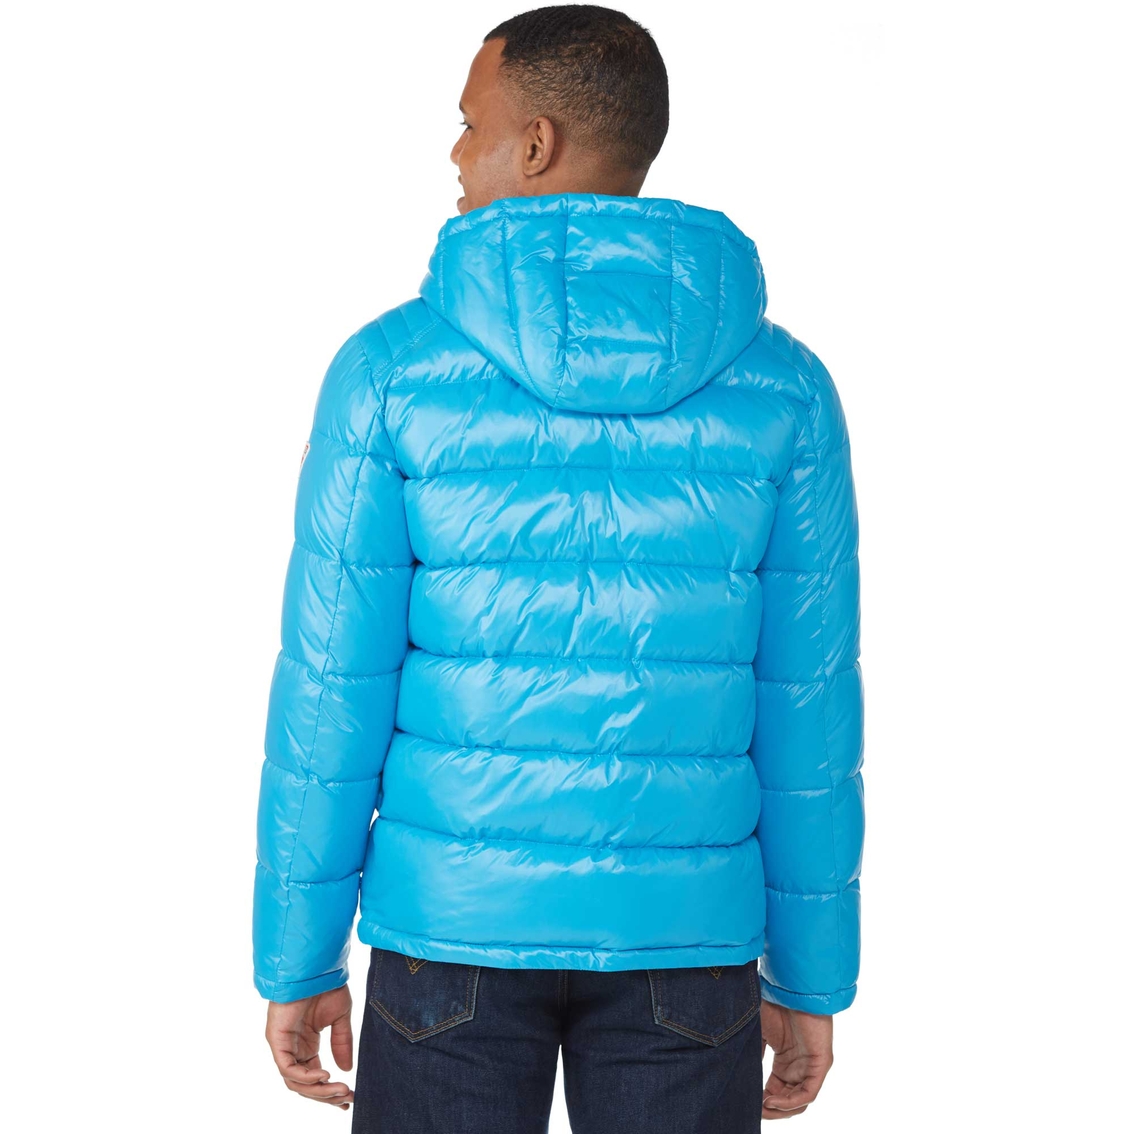 Guess Puffer Jacket - Image 2 of 3